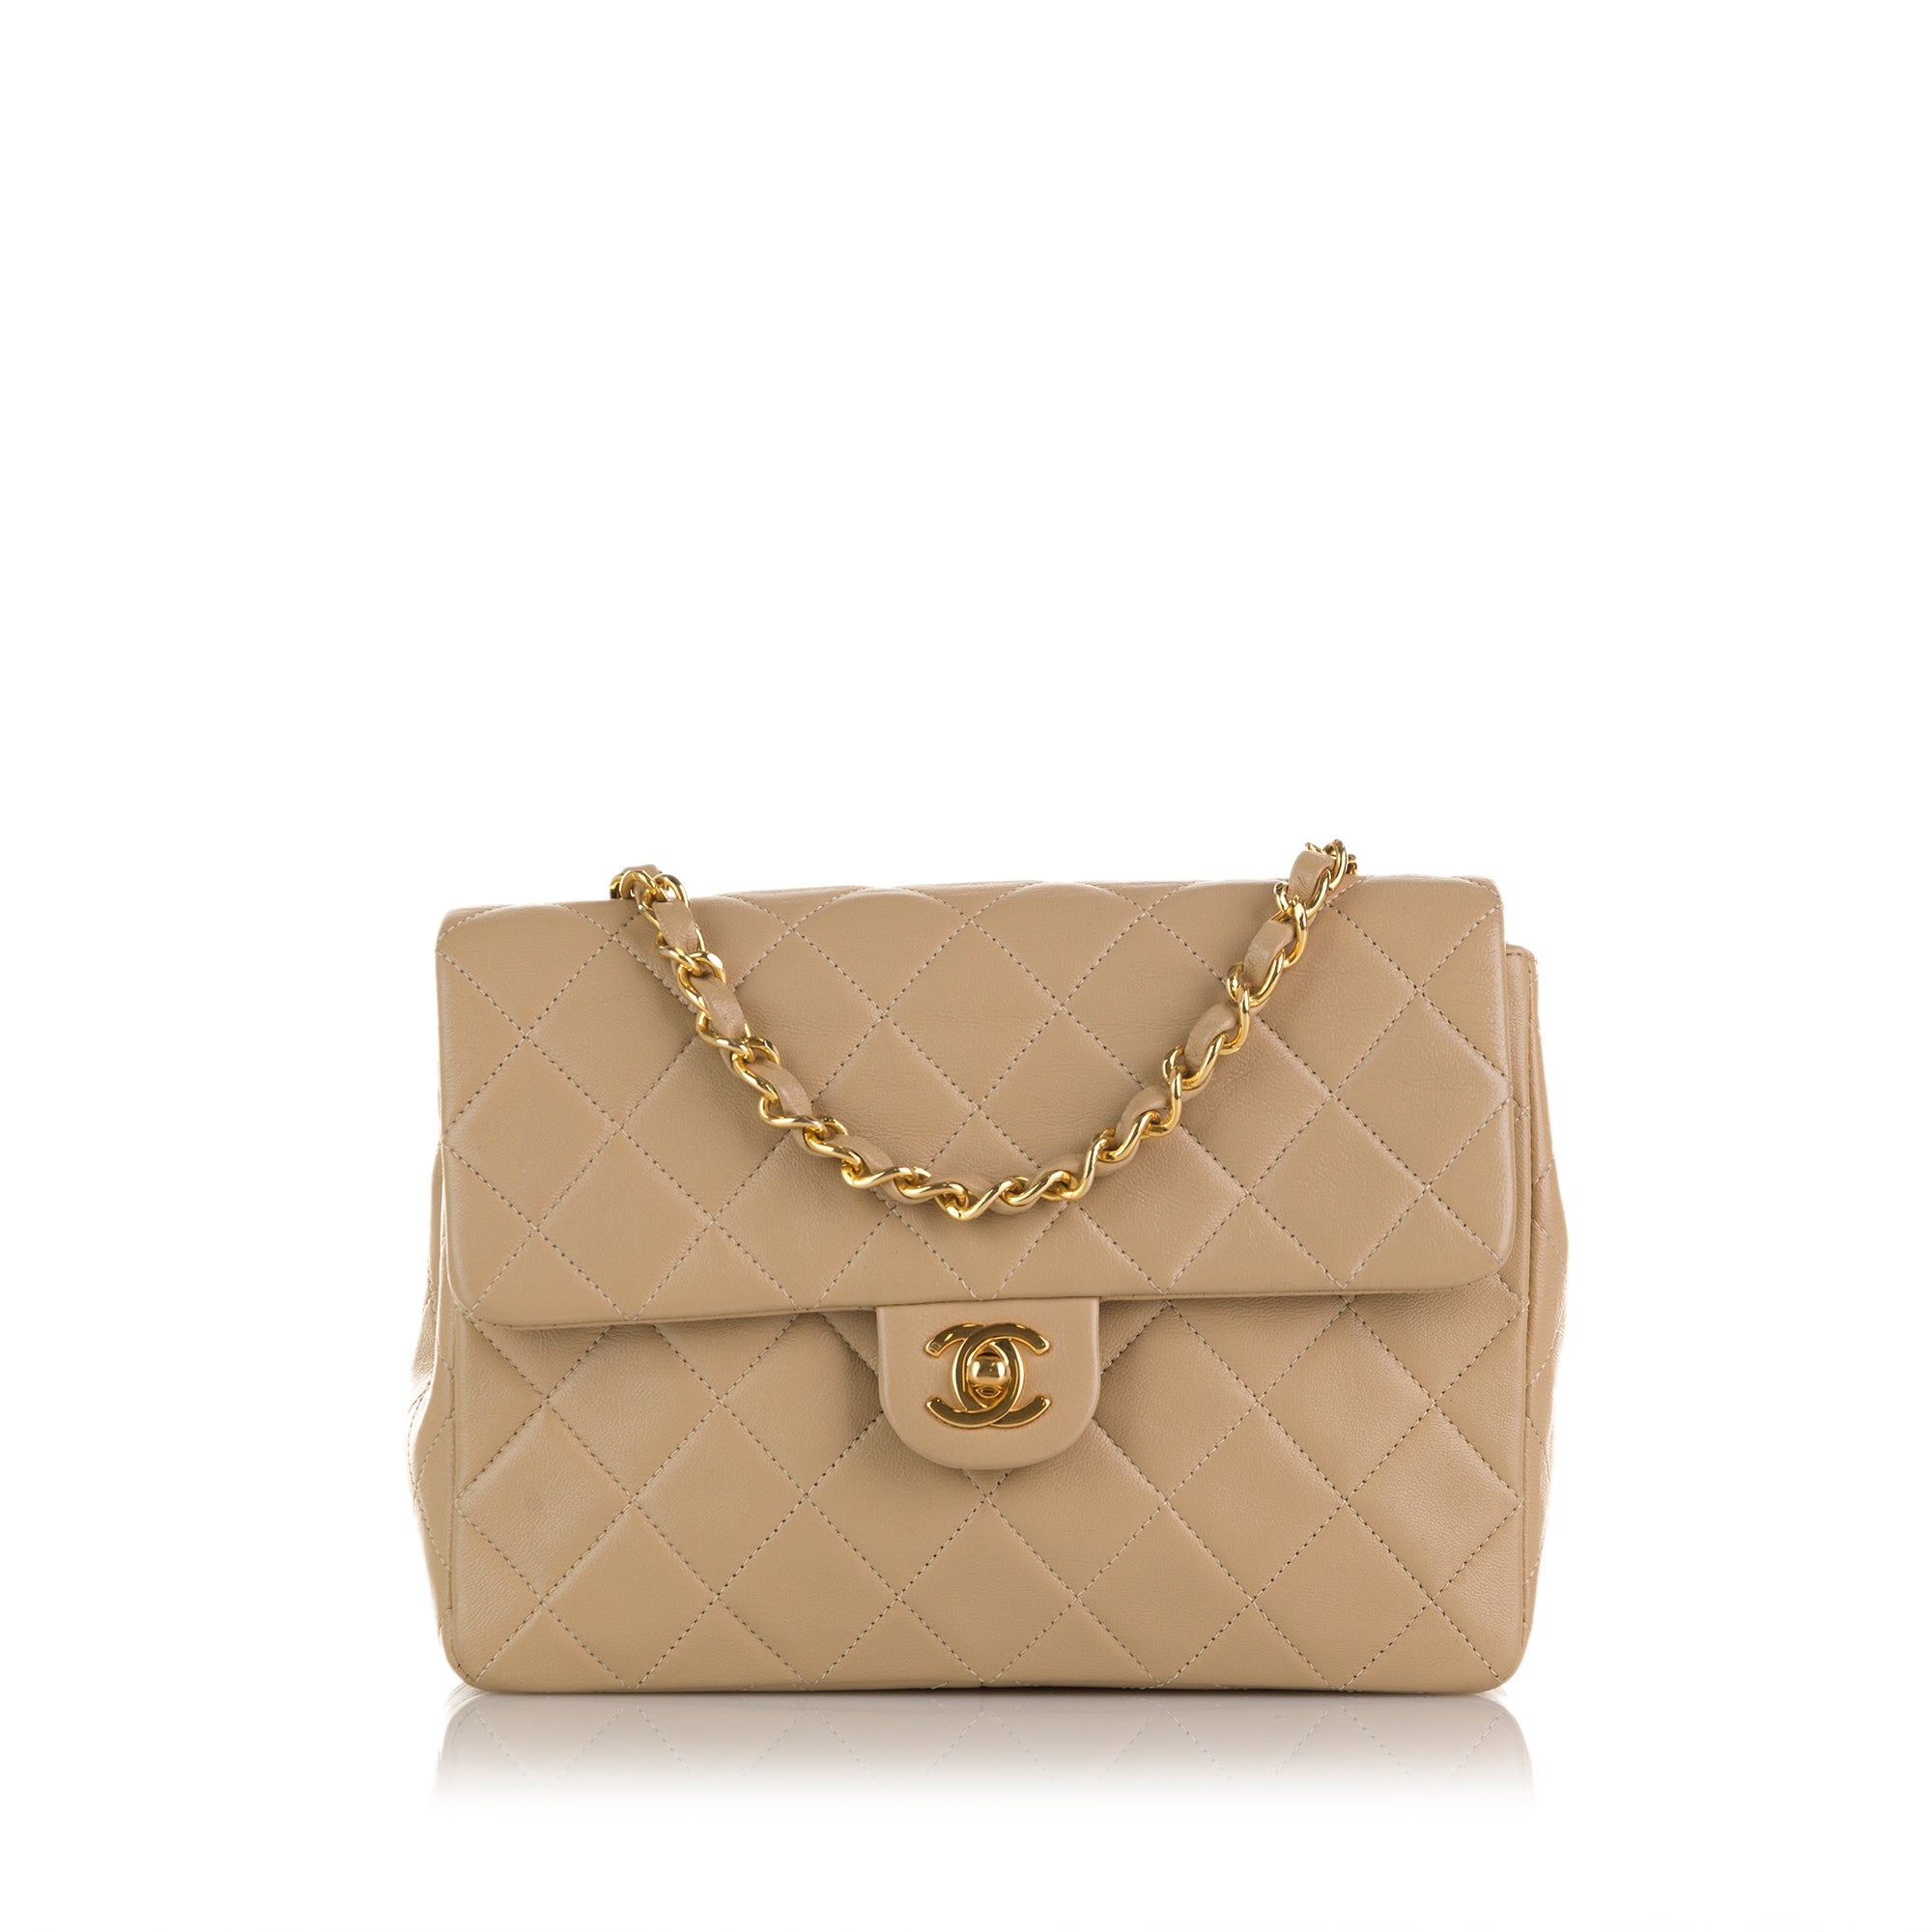 New In: Chanel Mini Classic Pink Bag  Clothes design, Chanel mini, Pink bag